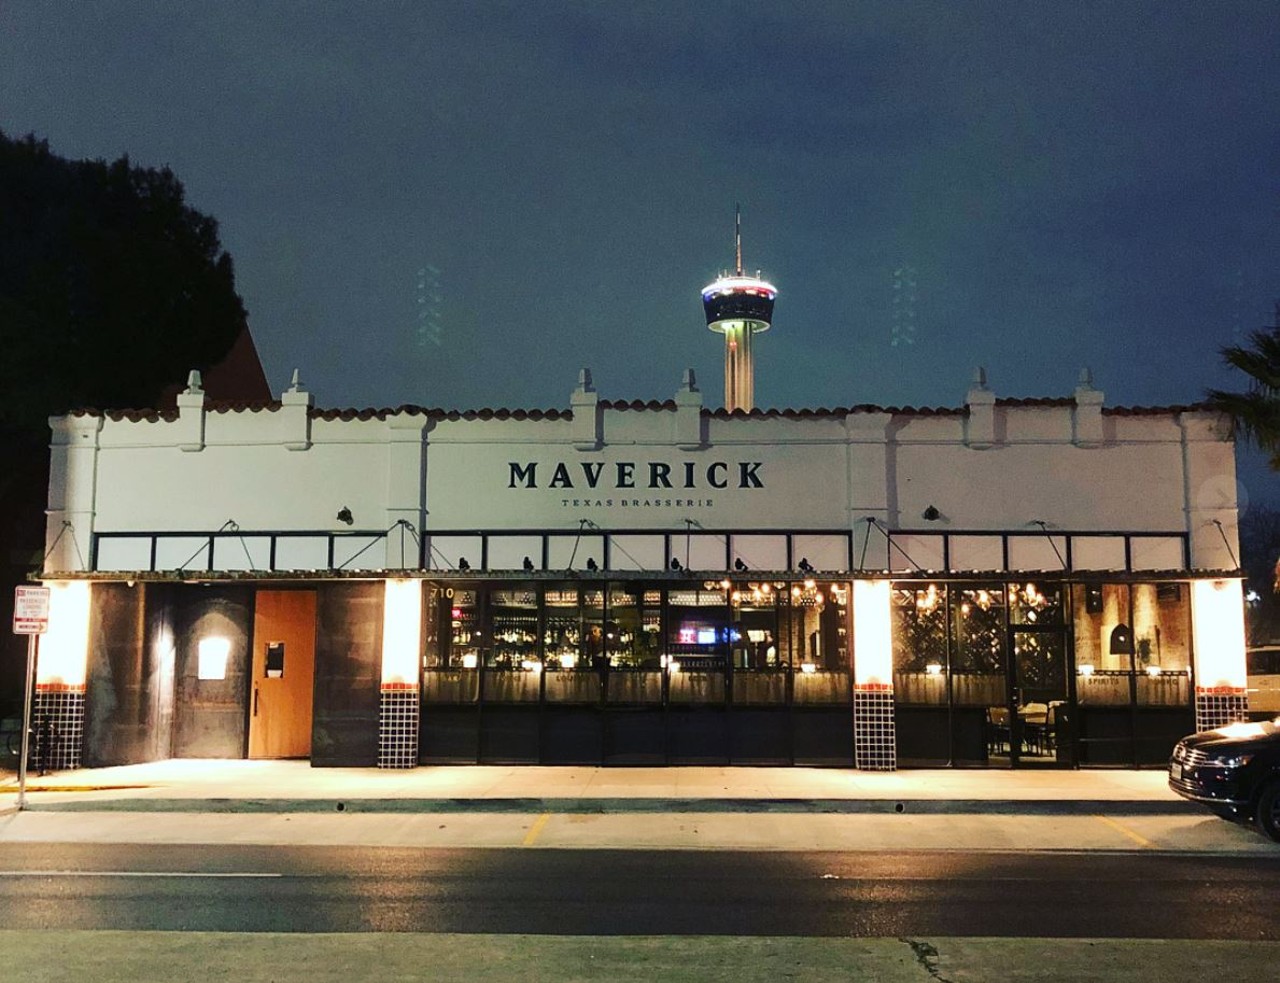 Maverick Texas Brasserie
710 S St Mary's St, (210) 973-6050, mavericktexas.com
Maverick Texas Brasserie, helmed by the folks who brought you Acenar, Biga on the Banks, along with chef Chris Carlson and sommelier Joshua Thomas, opened in early February. The massive restaurant is impeccably designed and already has a winning brunch.
Photo via Instagram / joshthomaswine